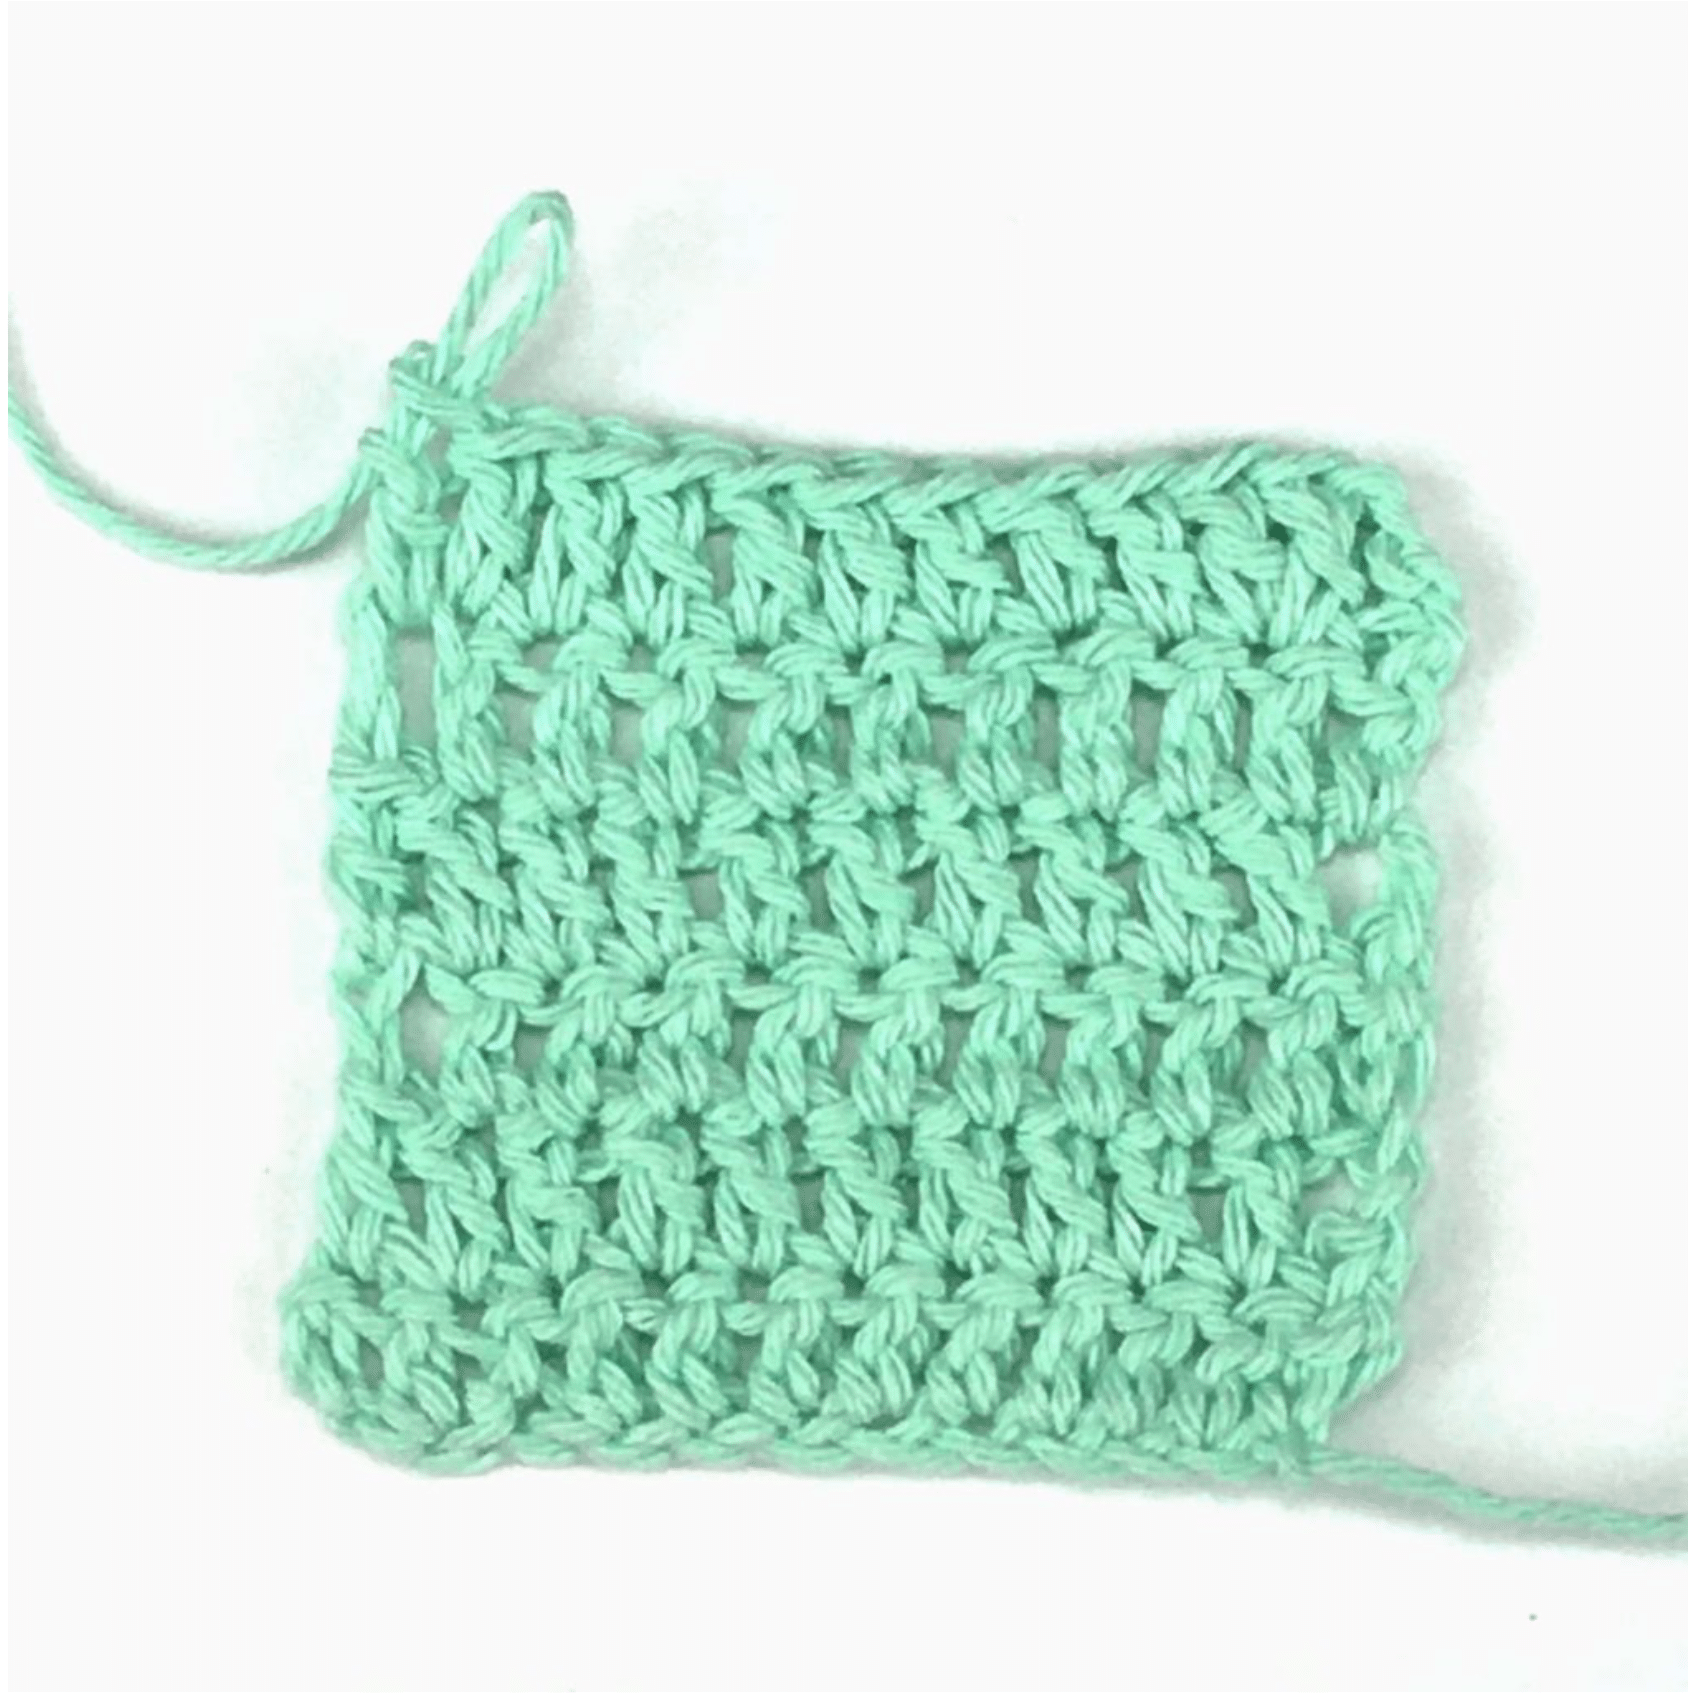 Hero Creations: The eco-friendly 3D row/stitch counter that's  revolutionizing the crochet world - ACCROchet